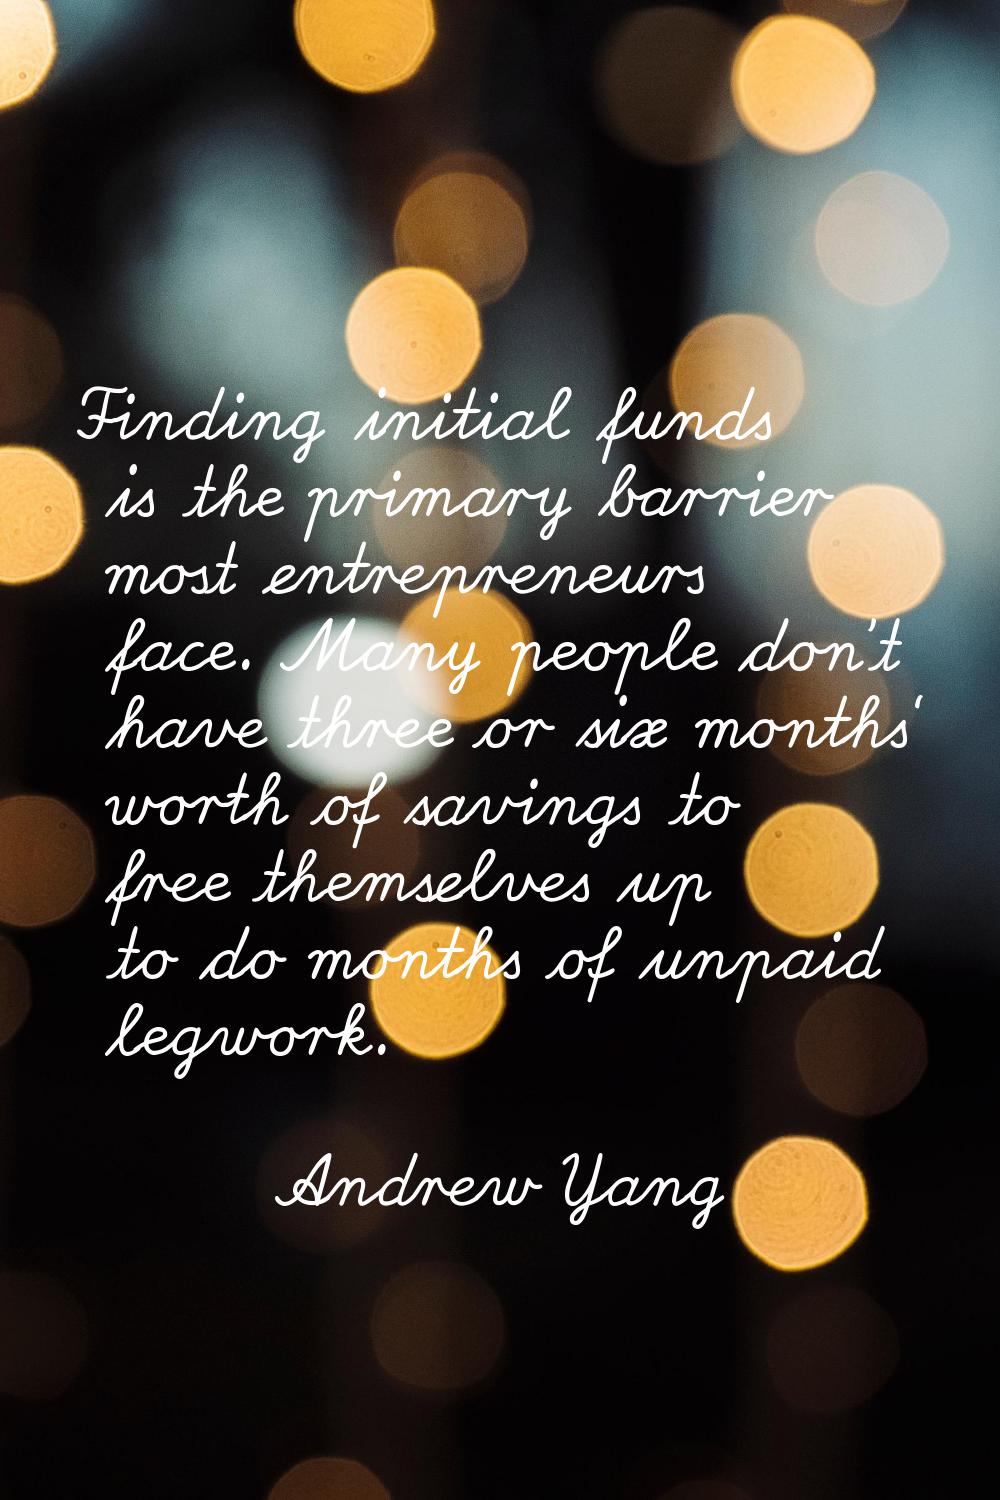 Finding initial funds is the primary barrier most entrepreneurs face. Many people don't have three 